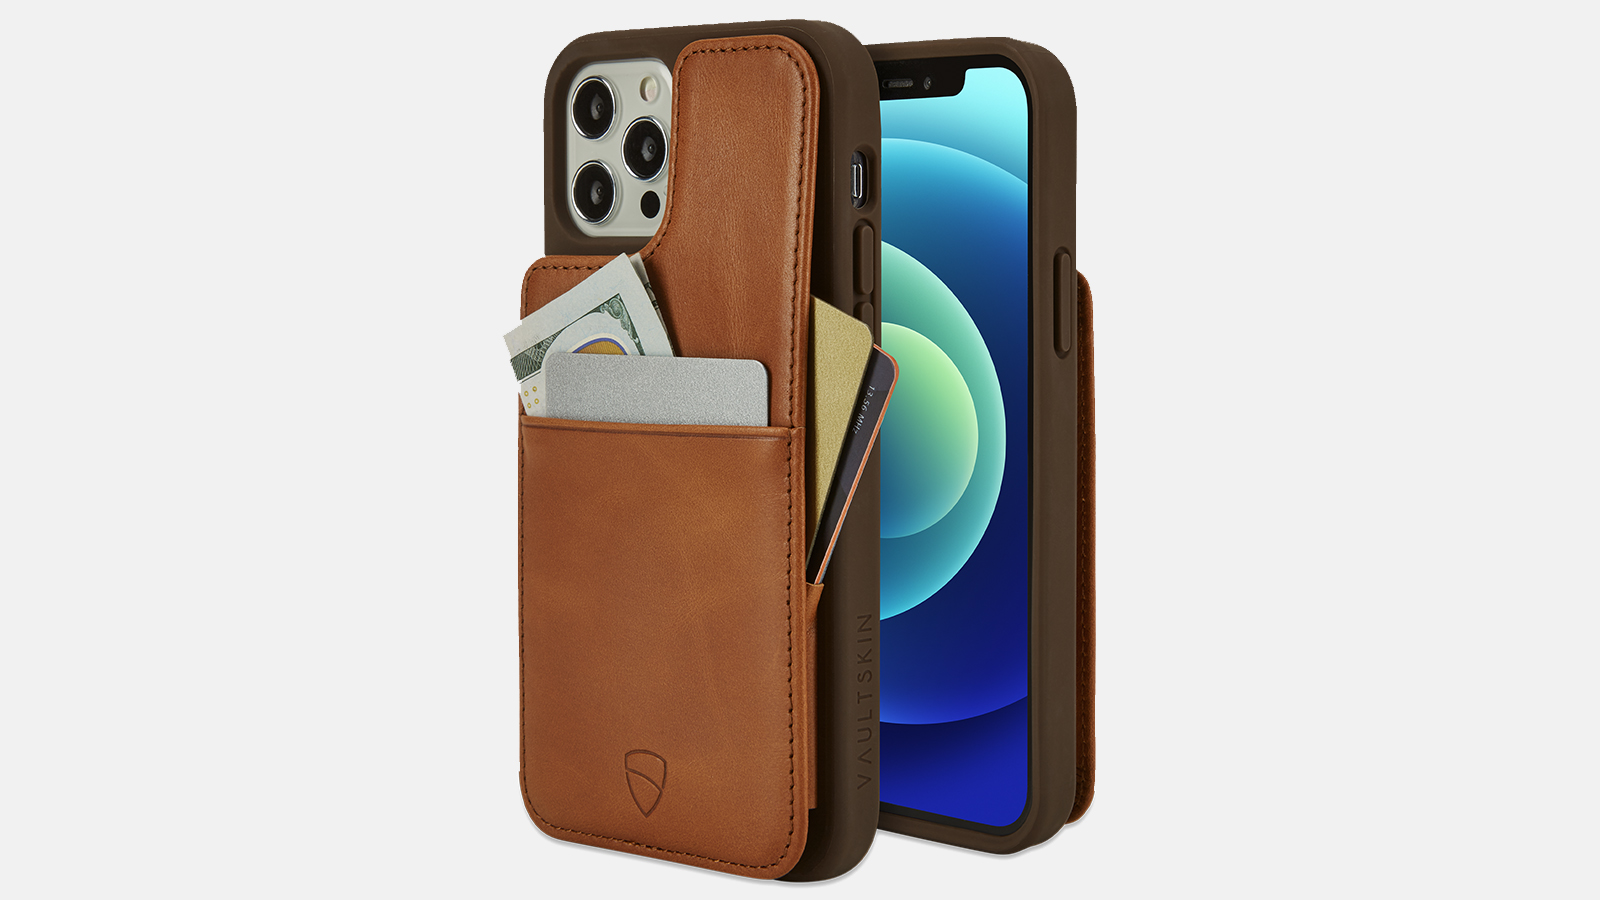 Vaultskin ETON ARMOUR - Leather Wallet Case for iPhone 12 / 12 Pro